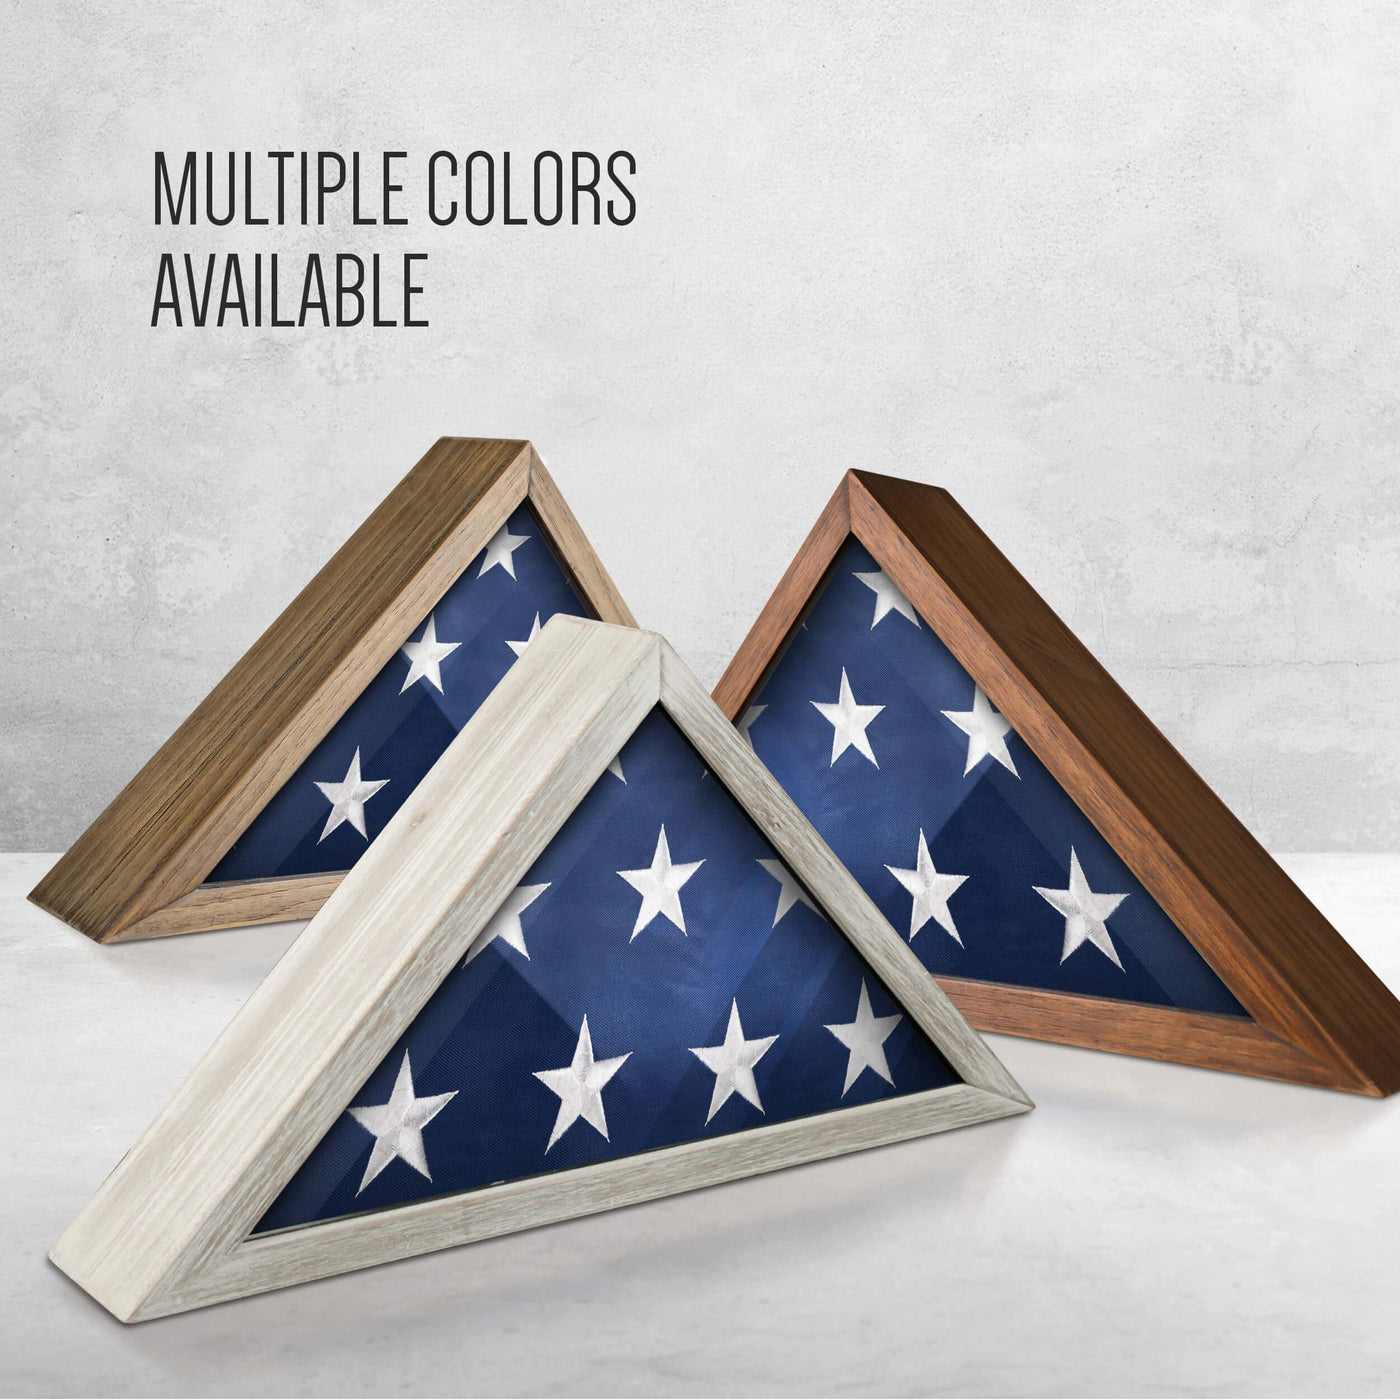 Rustic Military Flag Display Case for 9.5 x 5 American Veteran Burial Flag - Whitewashed Wood